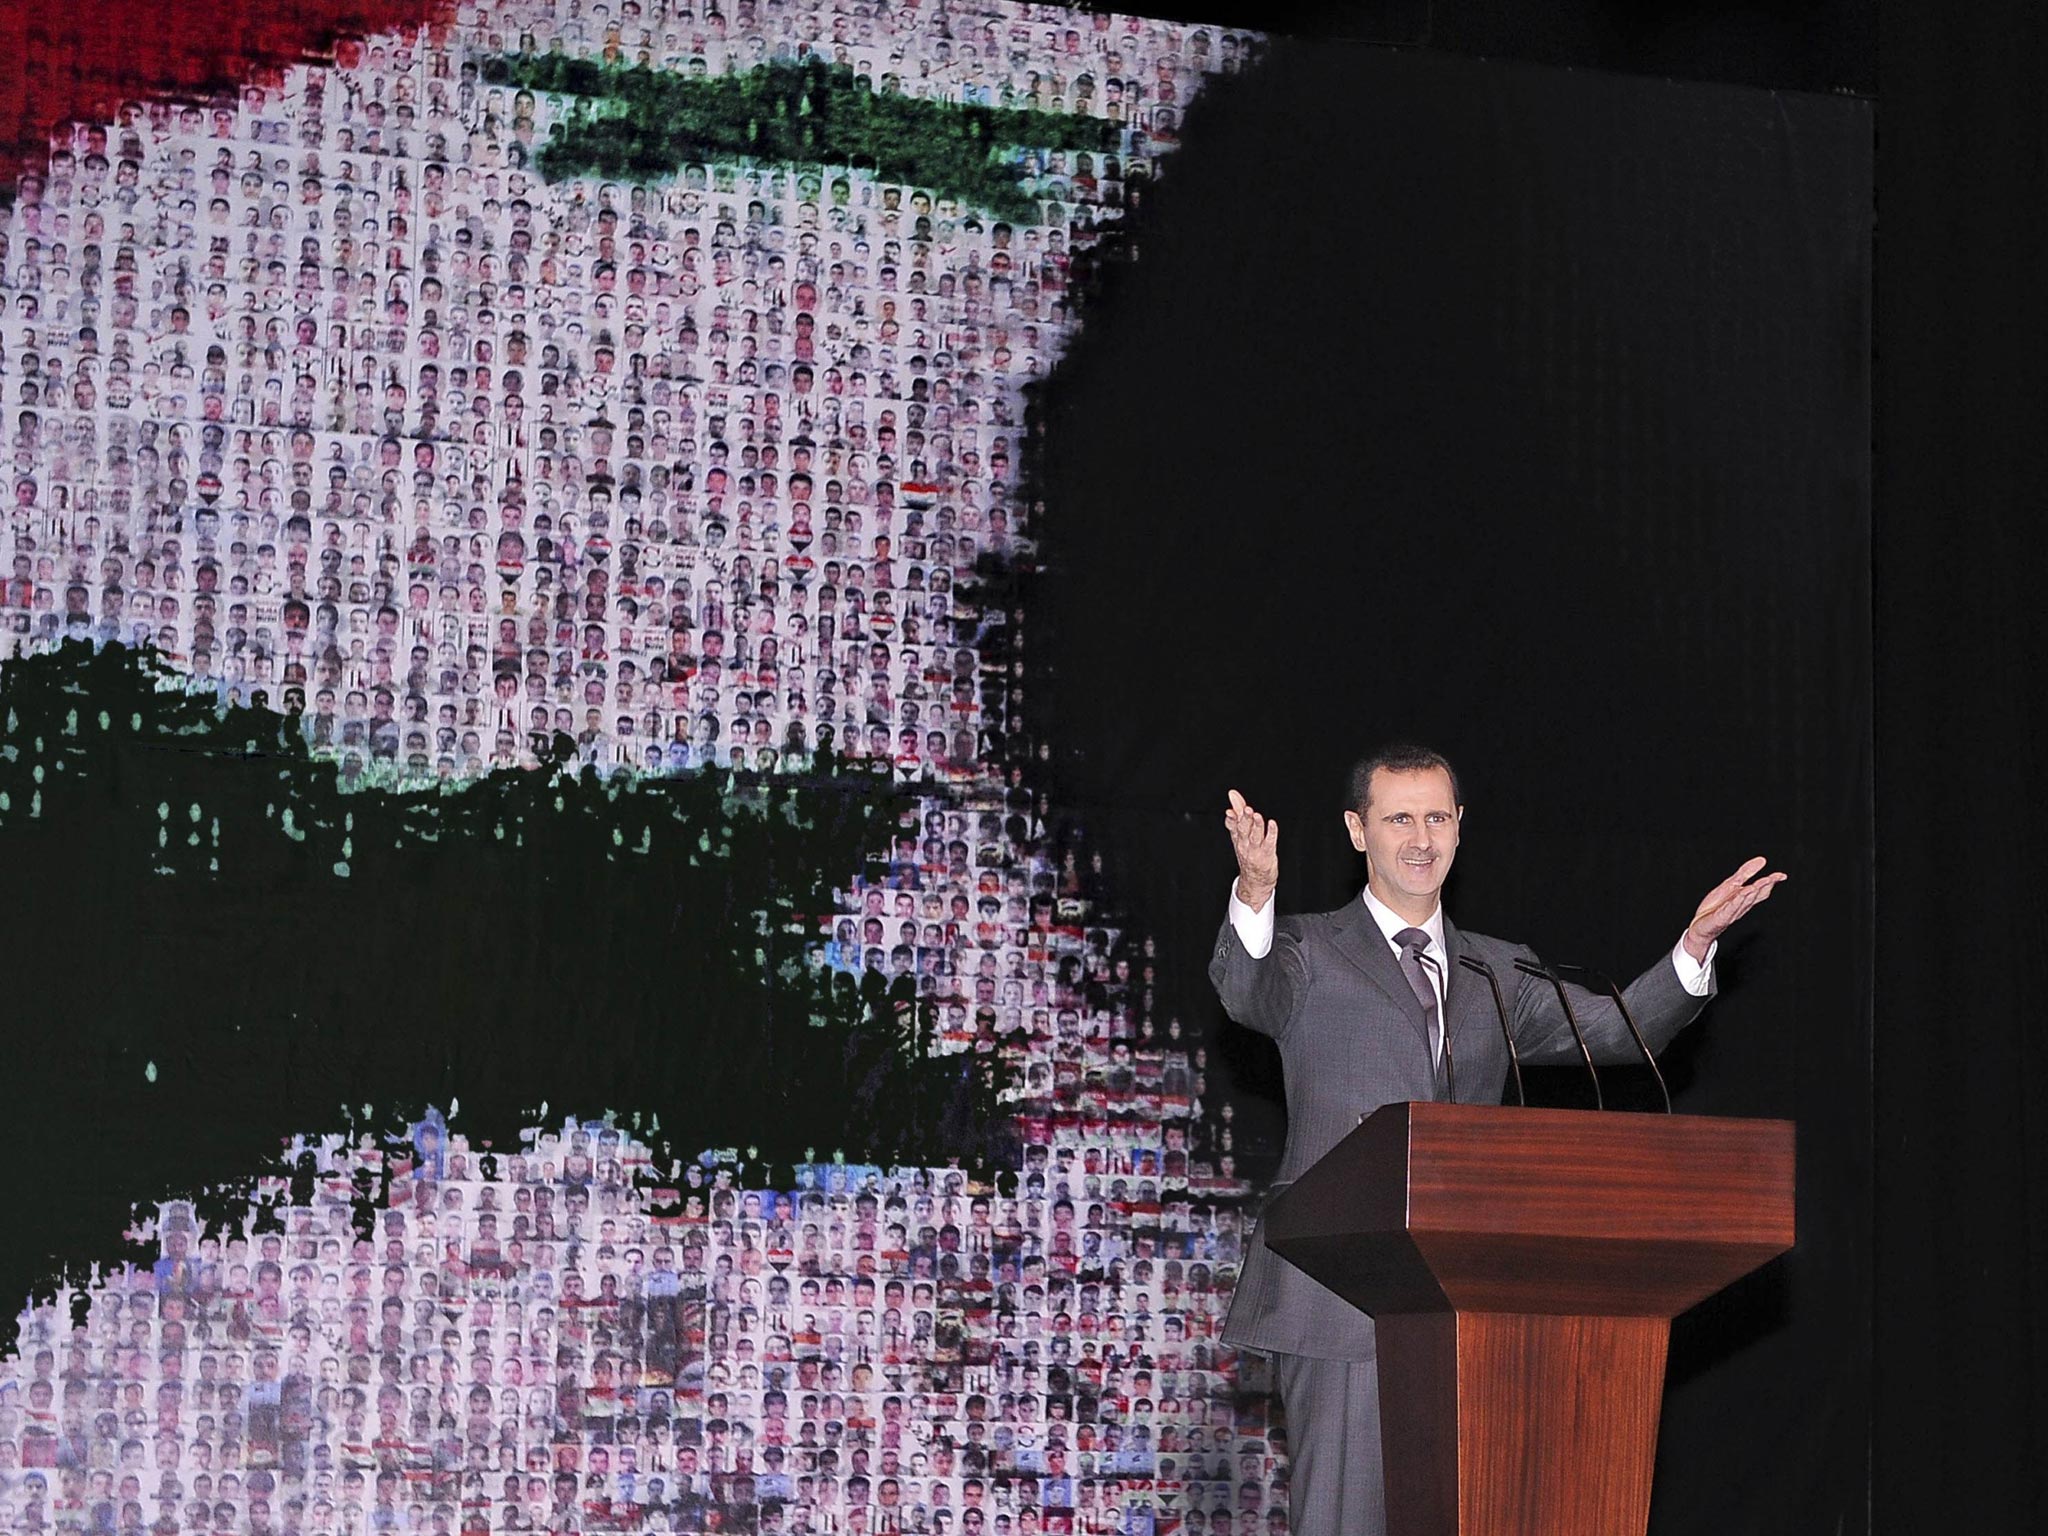 Assad has overseen a civil war in which 190,000 people have died